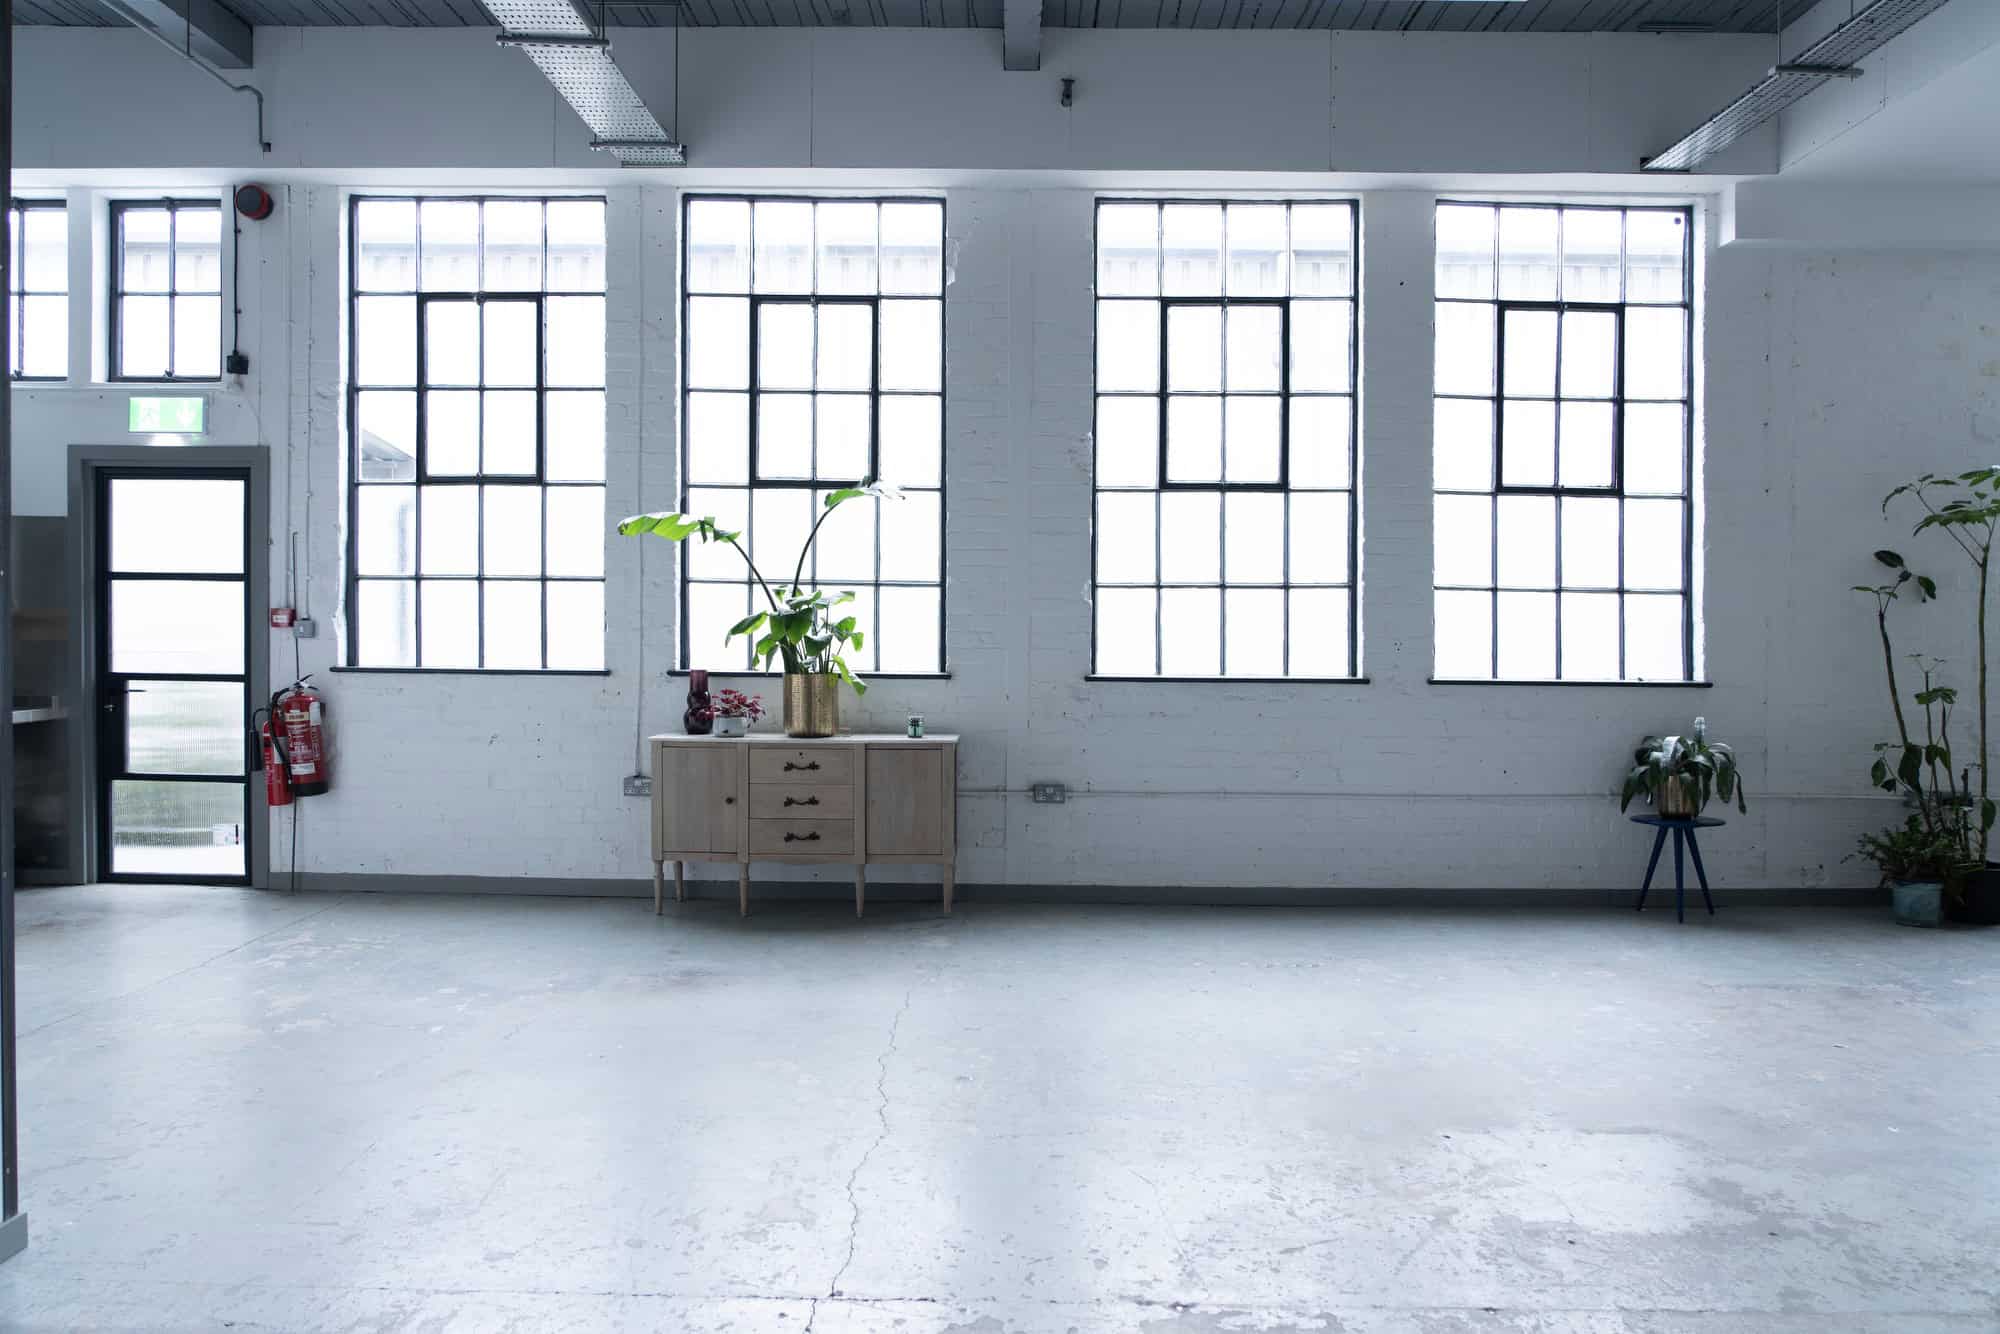 Hatch NW10 - A flexible studio space in London with onsite parking and easy access. The hire includes a number of different backdrops - The Location Guys